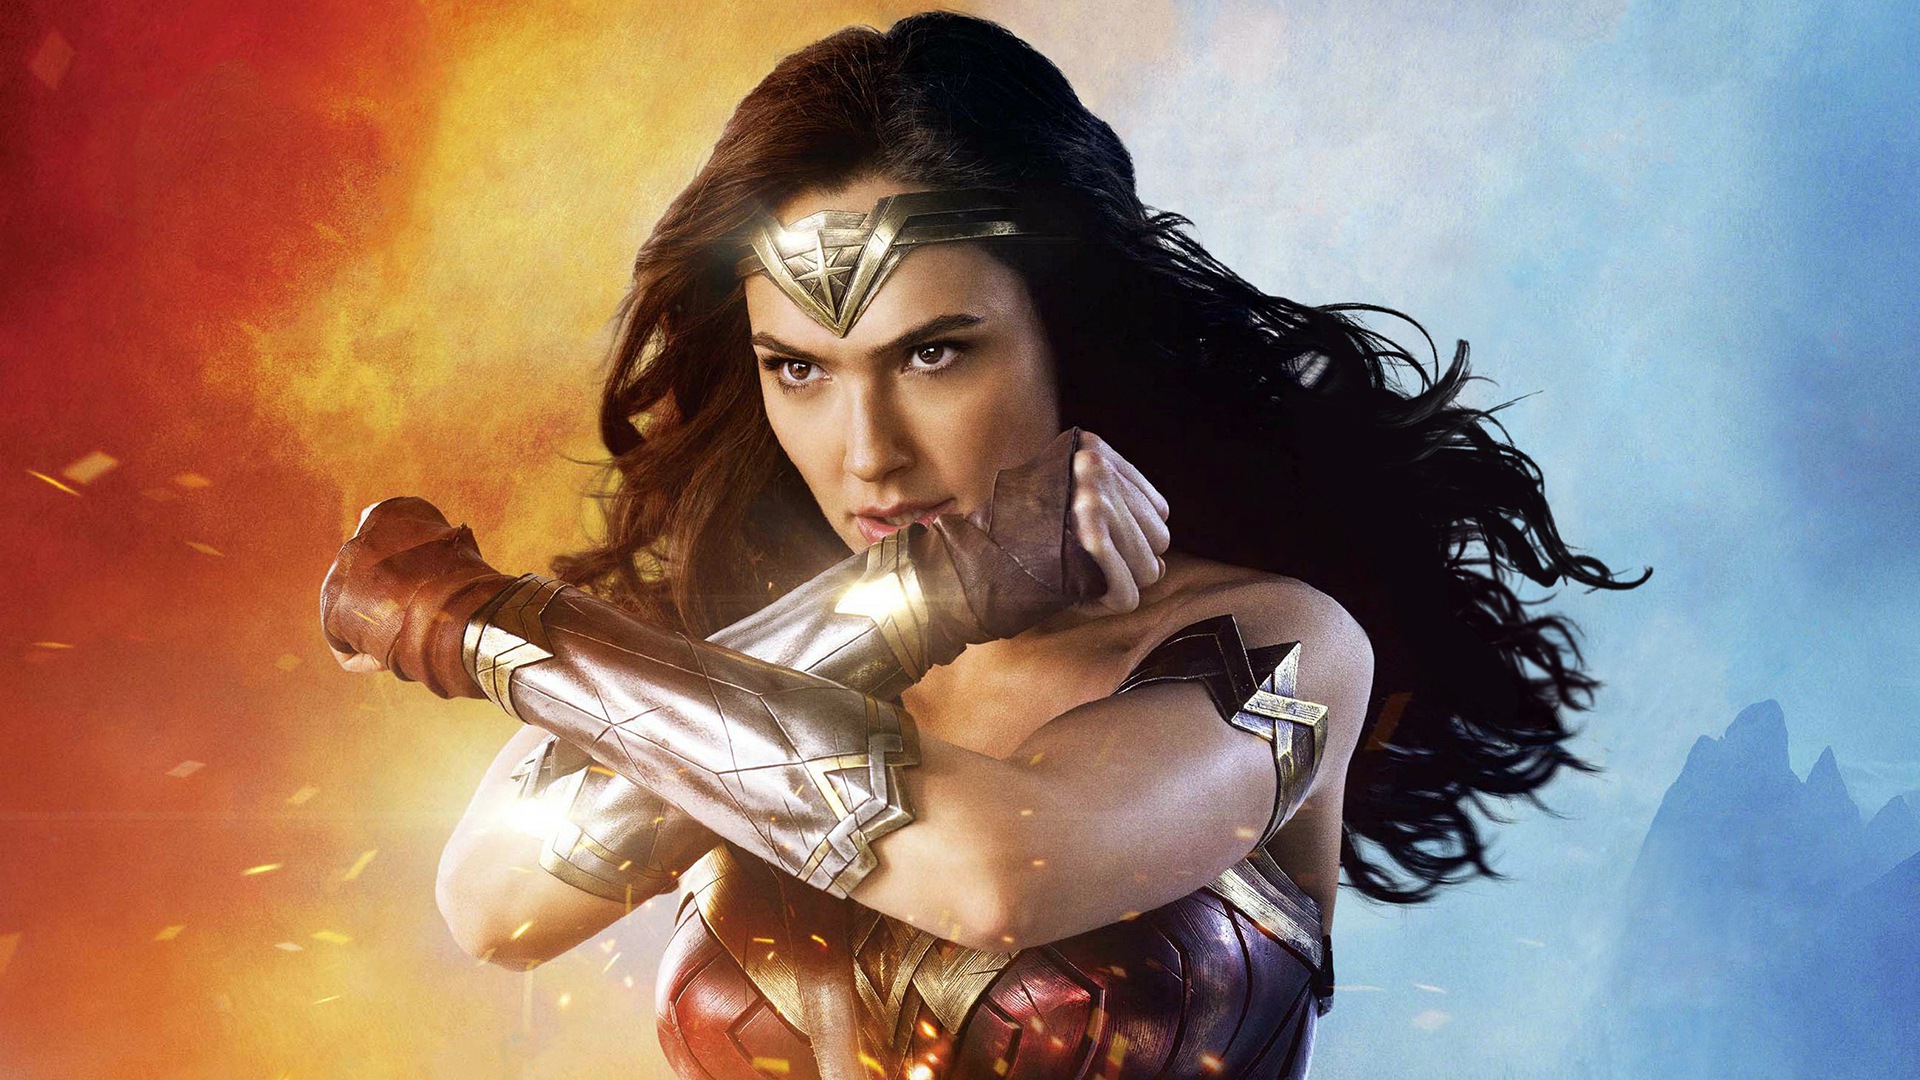 Wonder Woman crosses her arms to create her iconic pose in the Wonder Woman 1984 promotional image